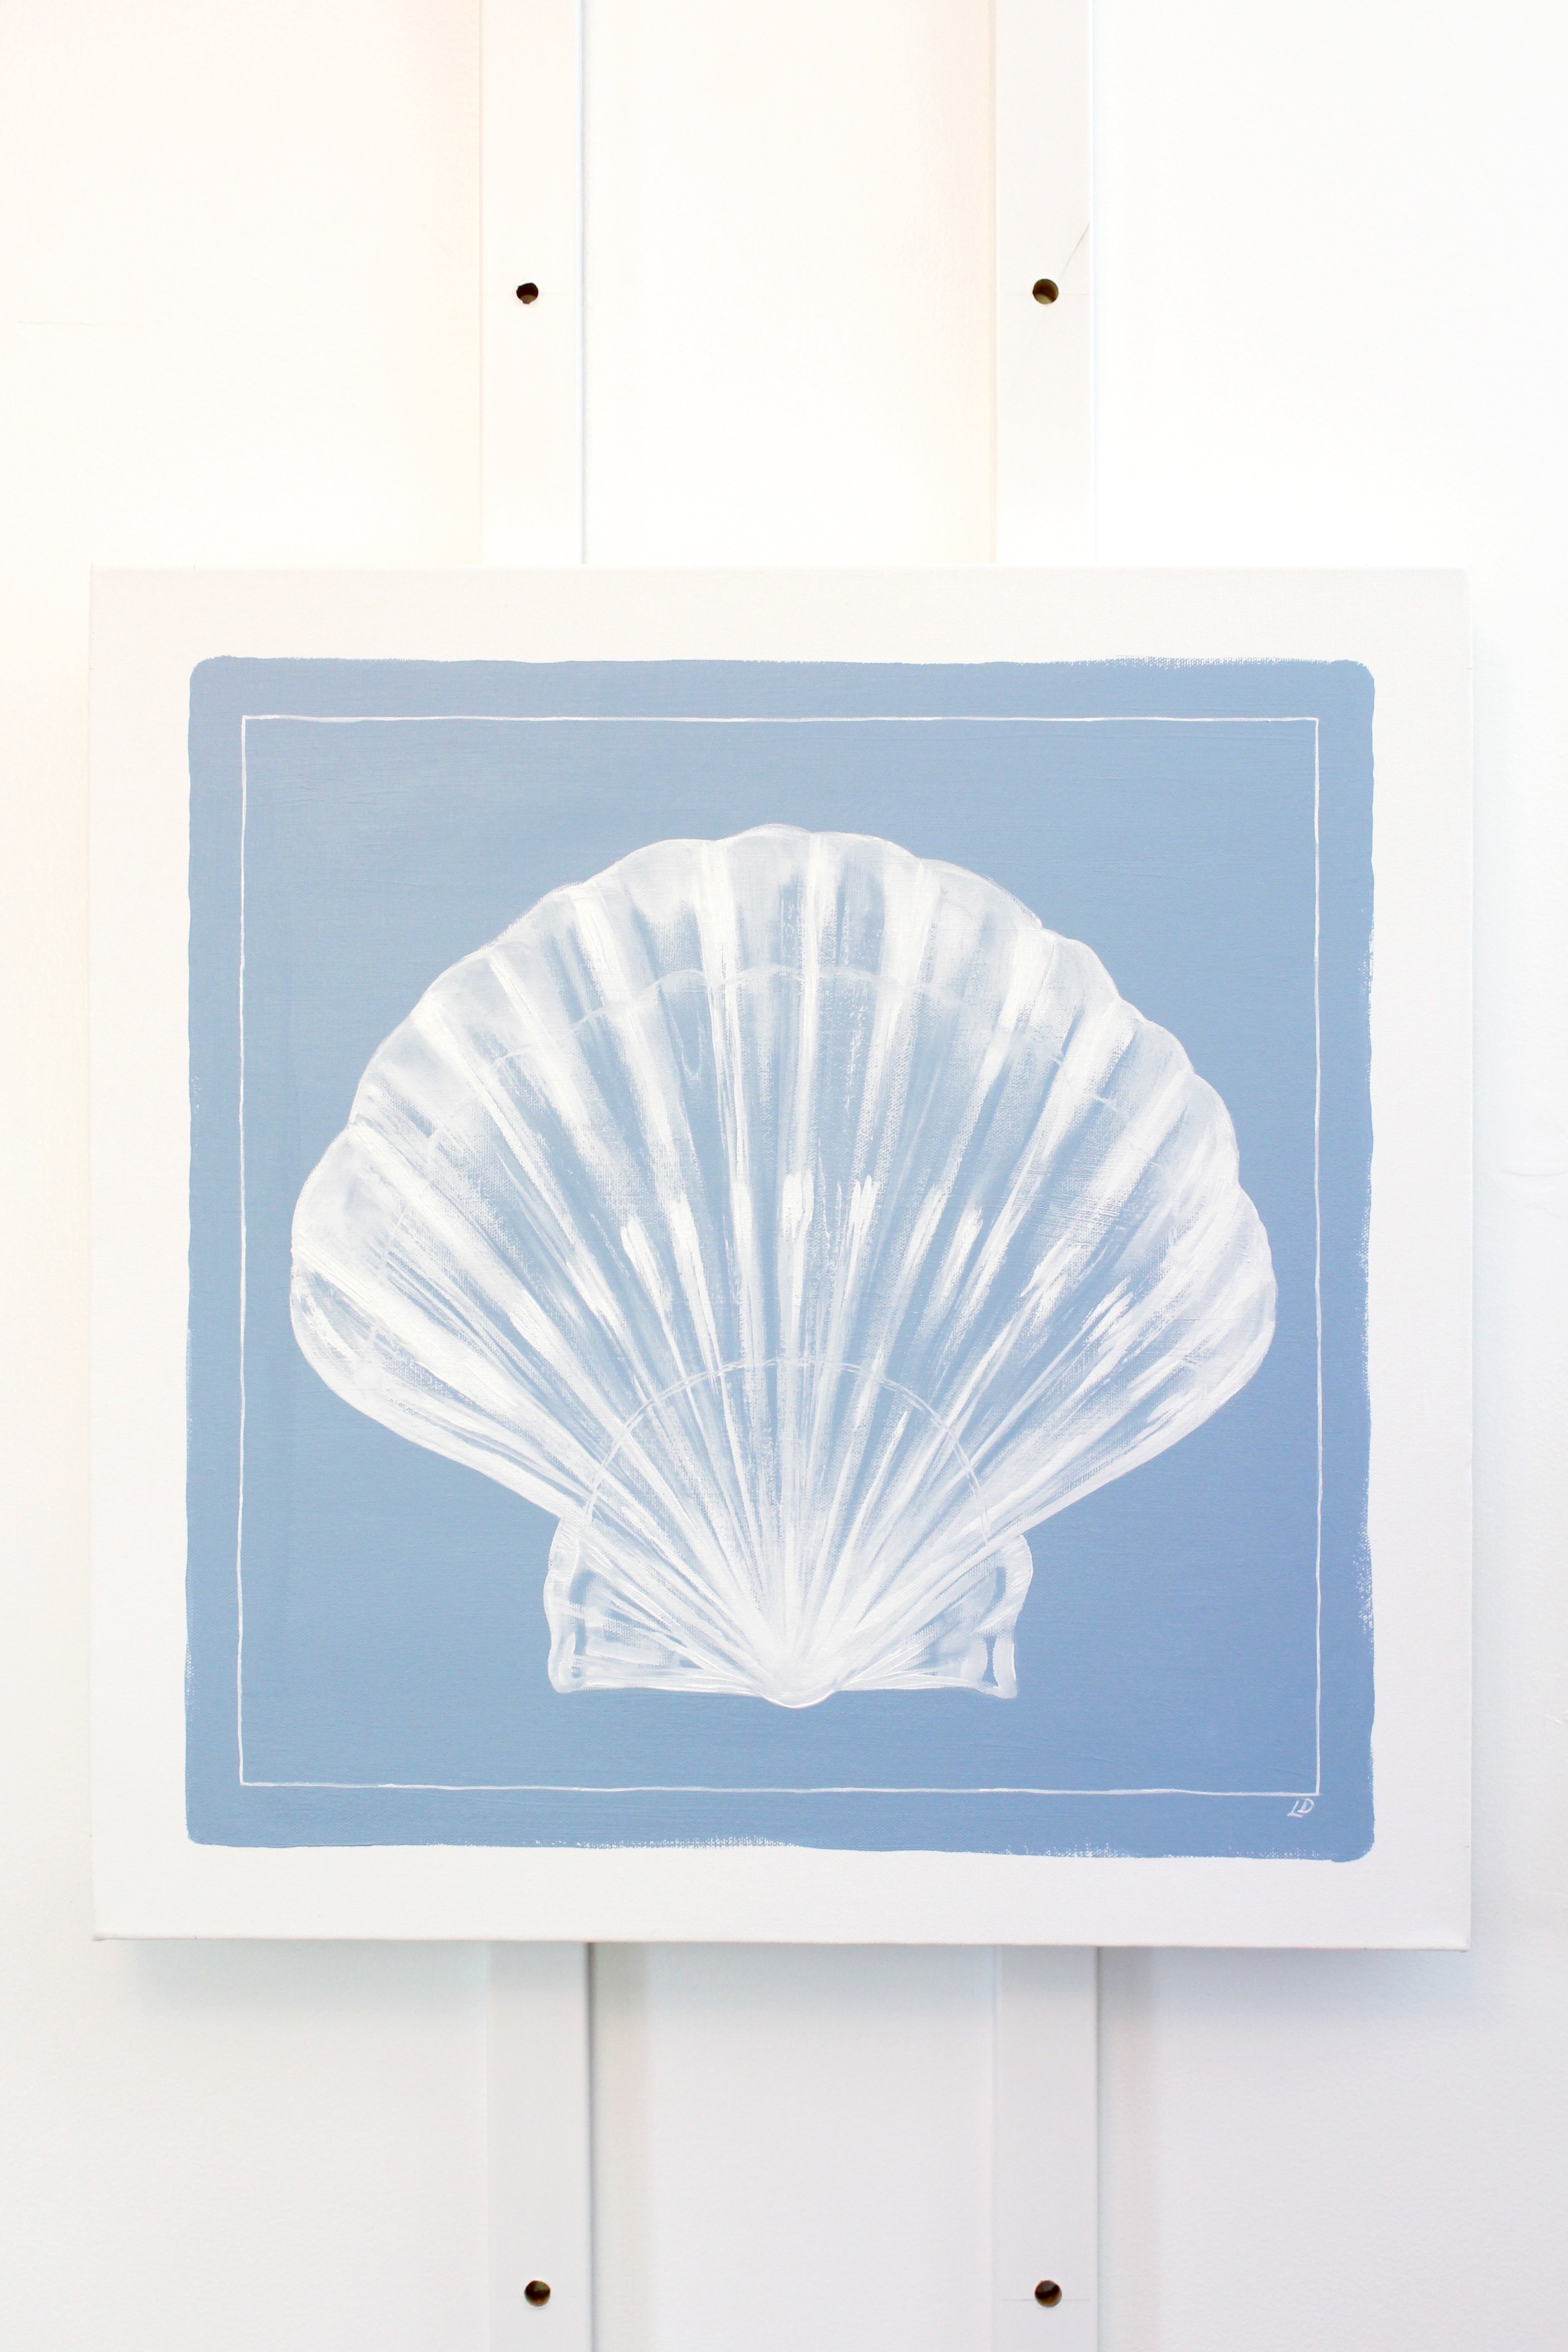 Scallop Shell on Blue – Artist Collectives